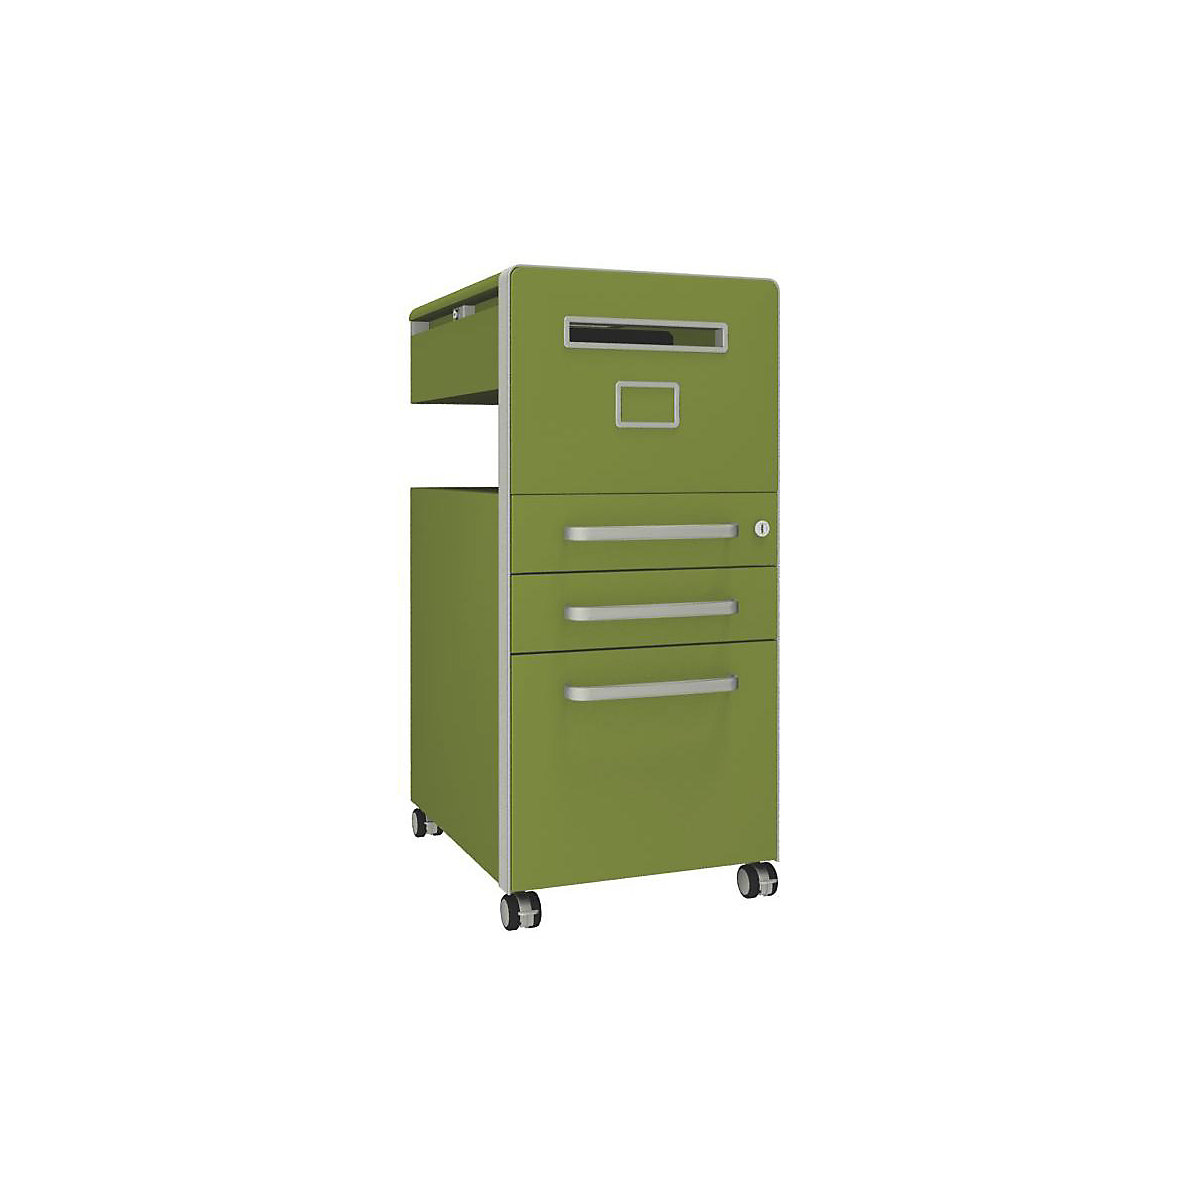 Bite™ pedestal furniture, with 1 whiteboard, opens on the right side – BISLEY, with 2 universal drawers, 1 suspension file drawer, green-12